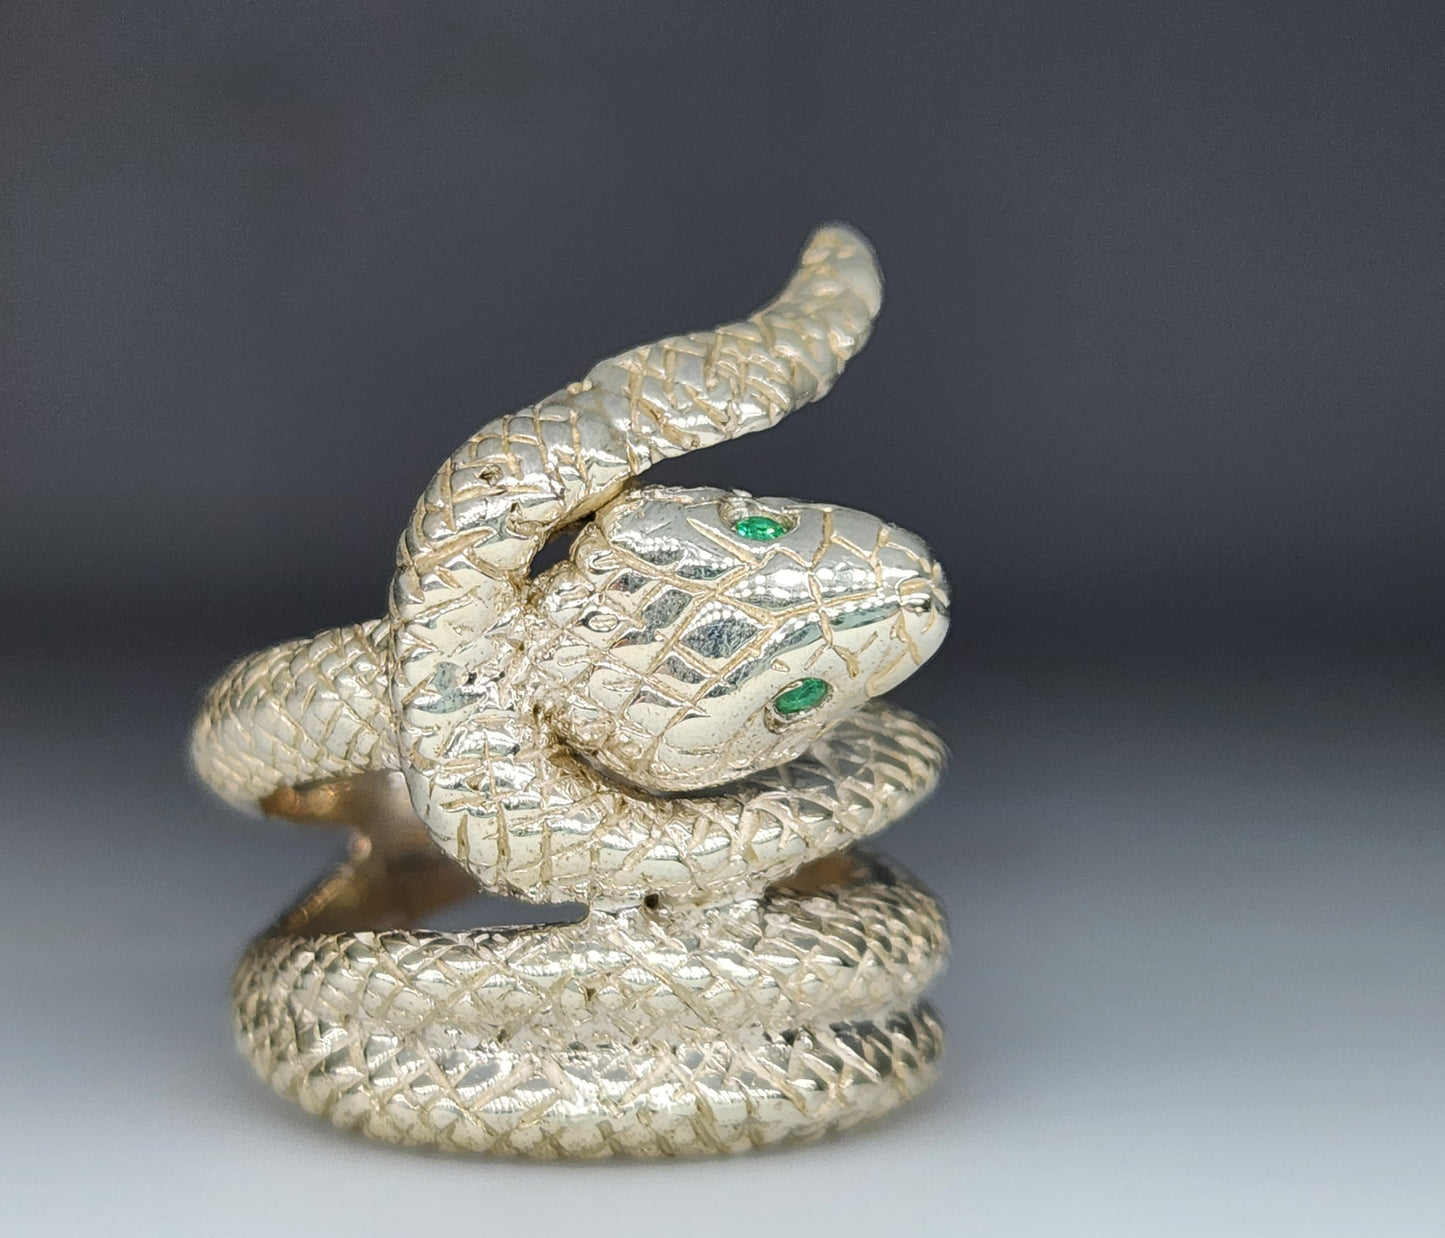 Sterling Silver Snake Ring with Emerald Eyes #409